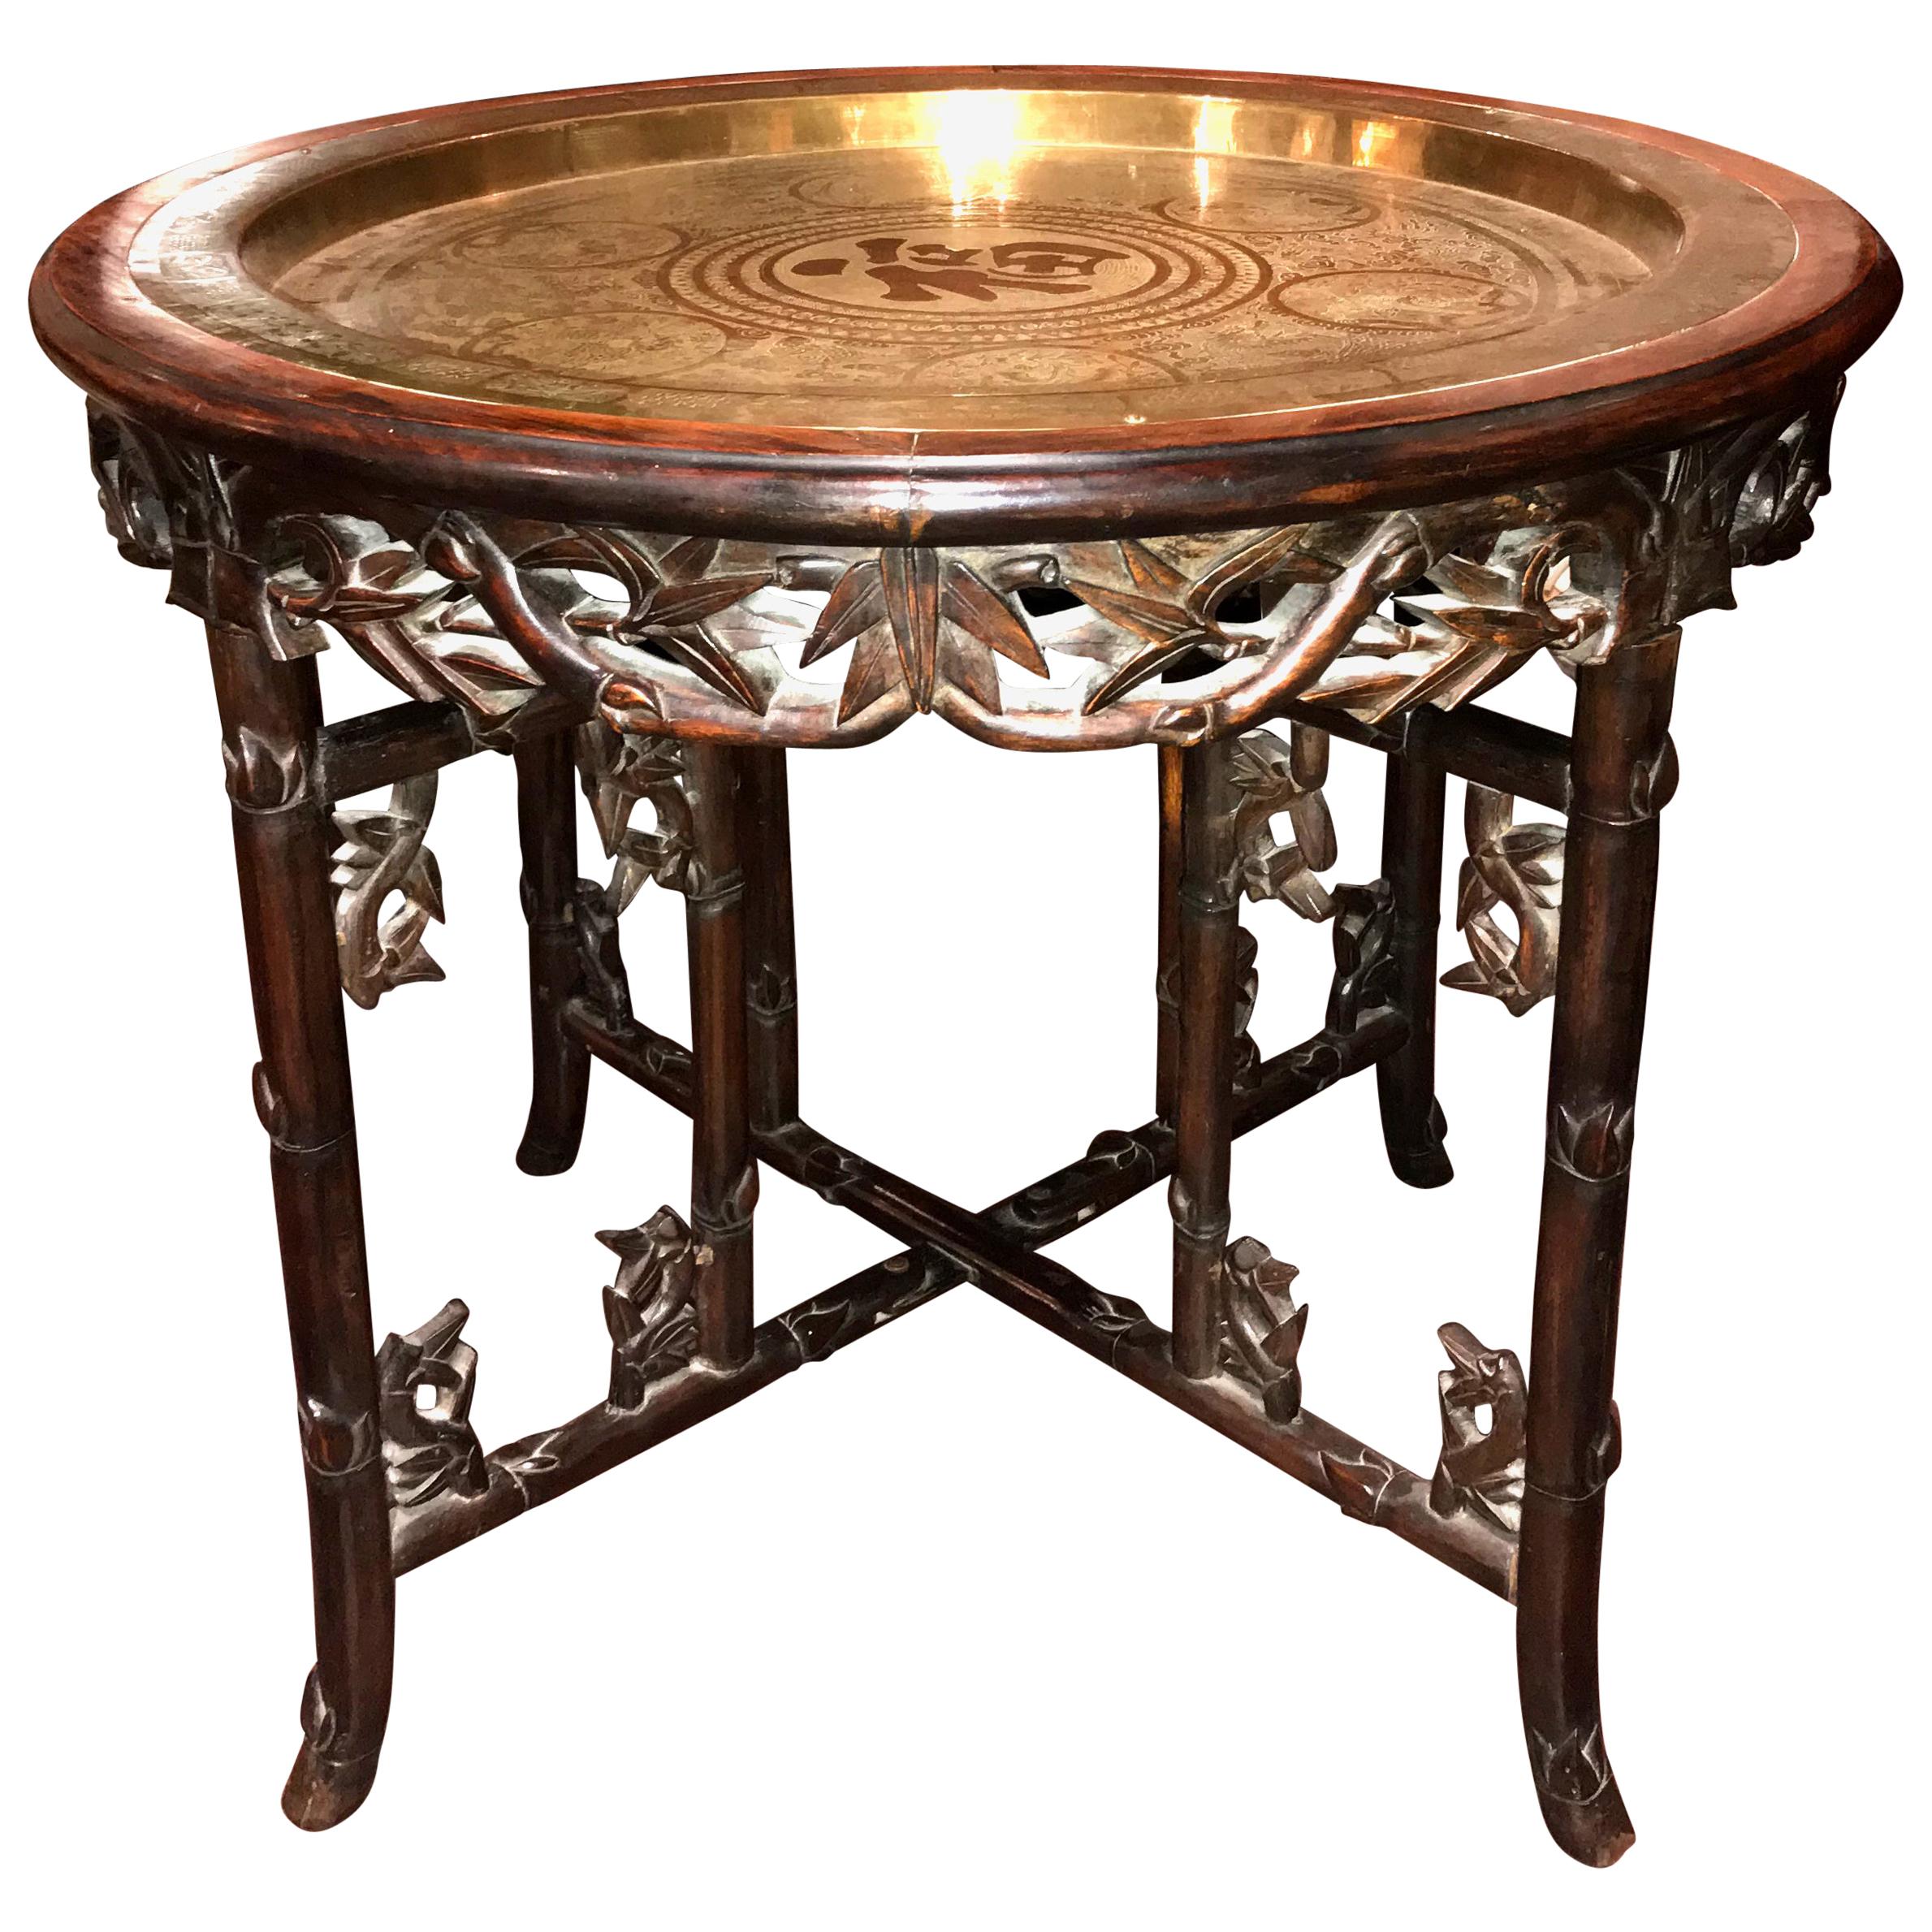 Chinese Foliate Carved Hardwood Folding Table with Brass Tray Top